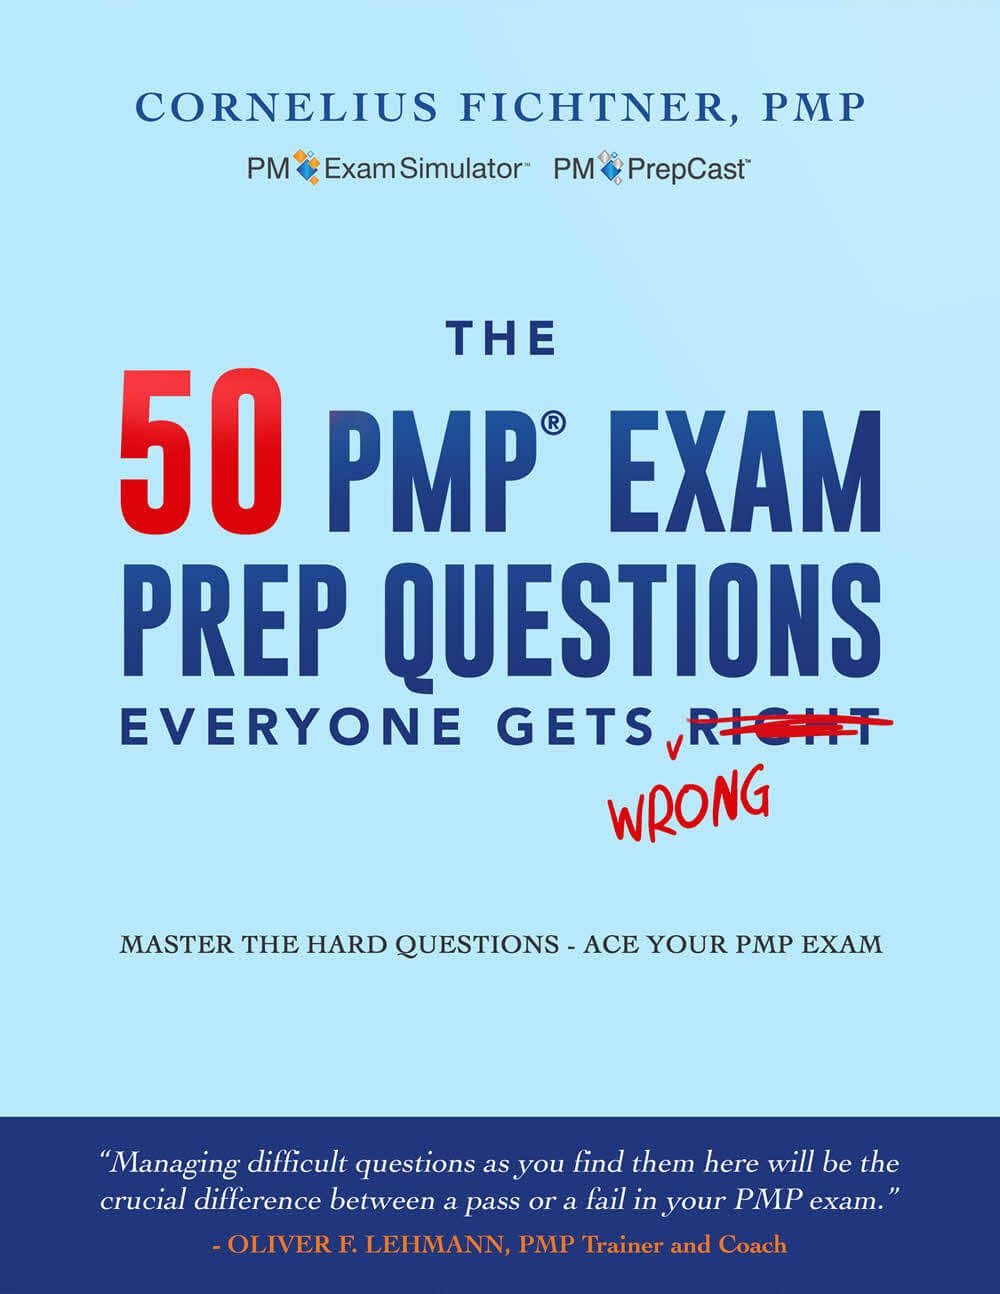 The 50 PMP Exam Questions Everyone Gets Wrong